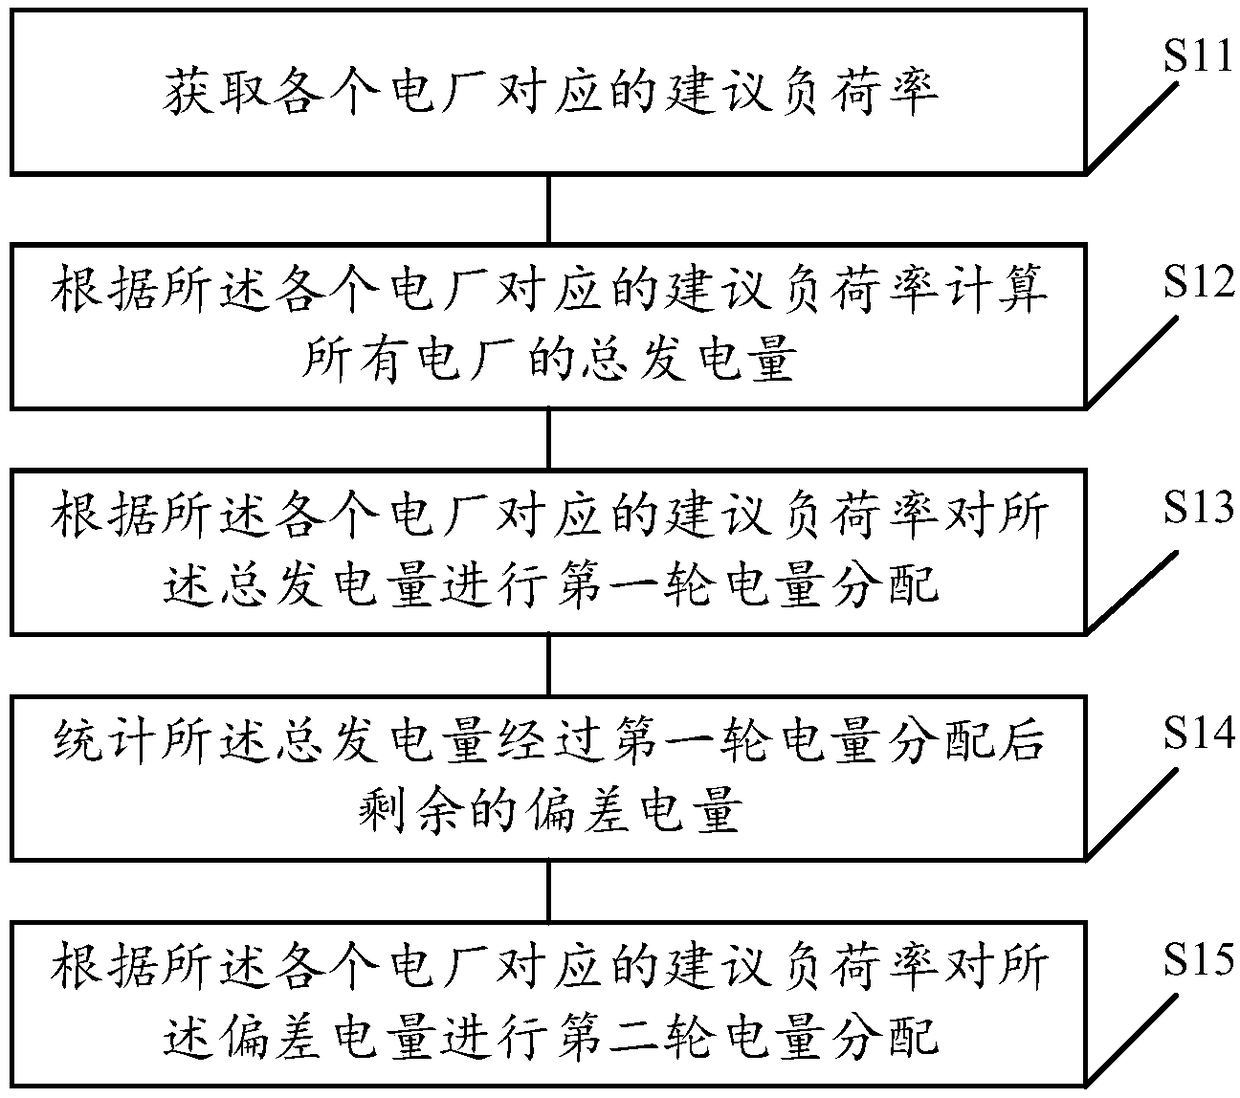 Generation scheduling error electricity quantity distribution method based on load rate adjustment direction